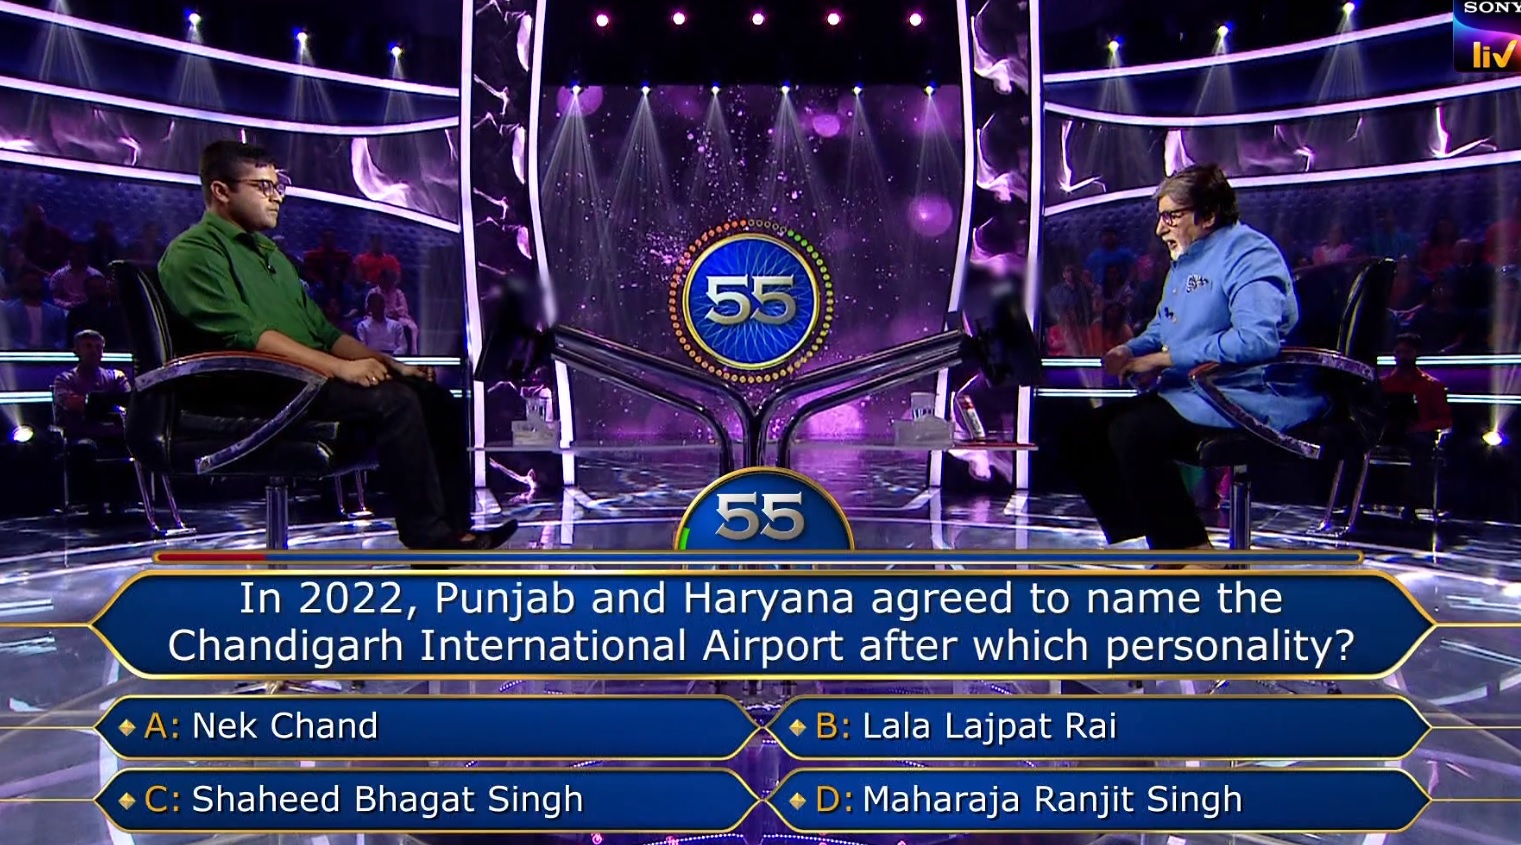 Ques : In 2022, Punjab and Haryana agreed to name the Chandigarh International Airport after which personality?